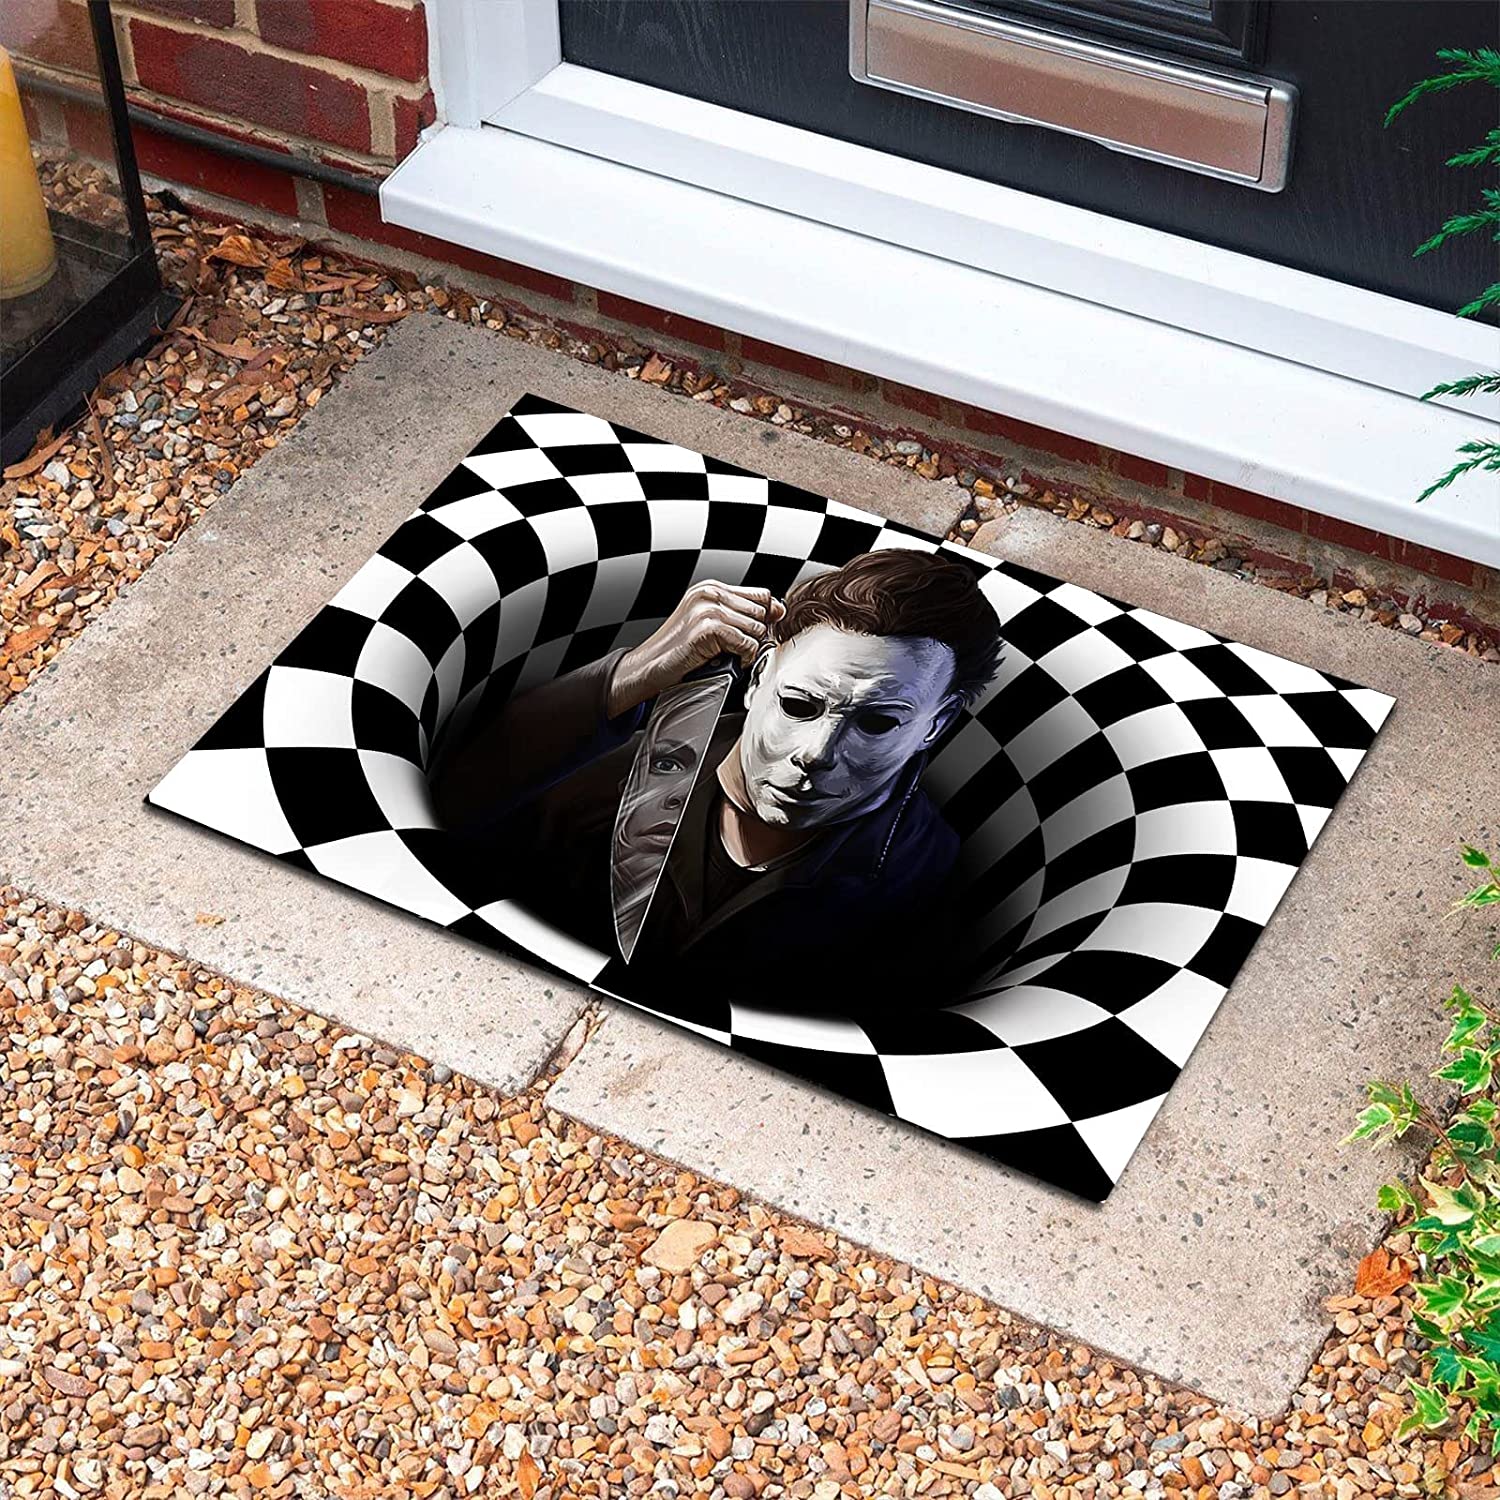 10 Halloween Doormats That Will Give Guests A Spirited Welcome